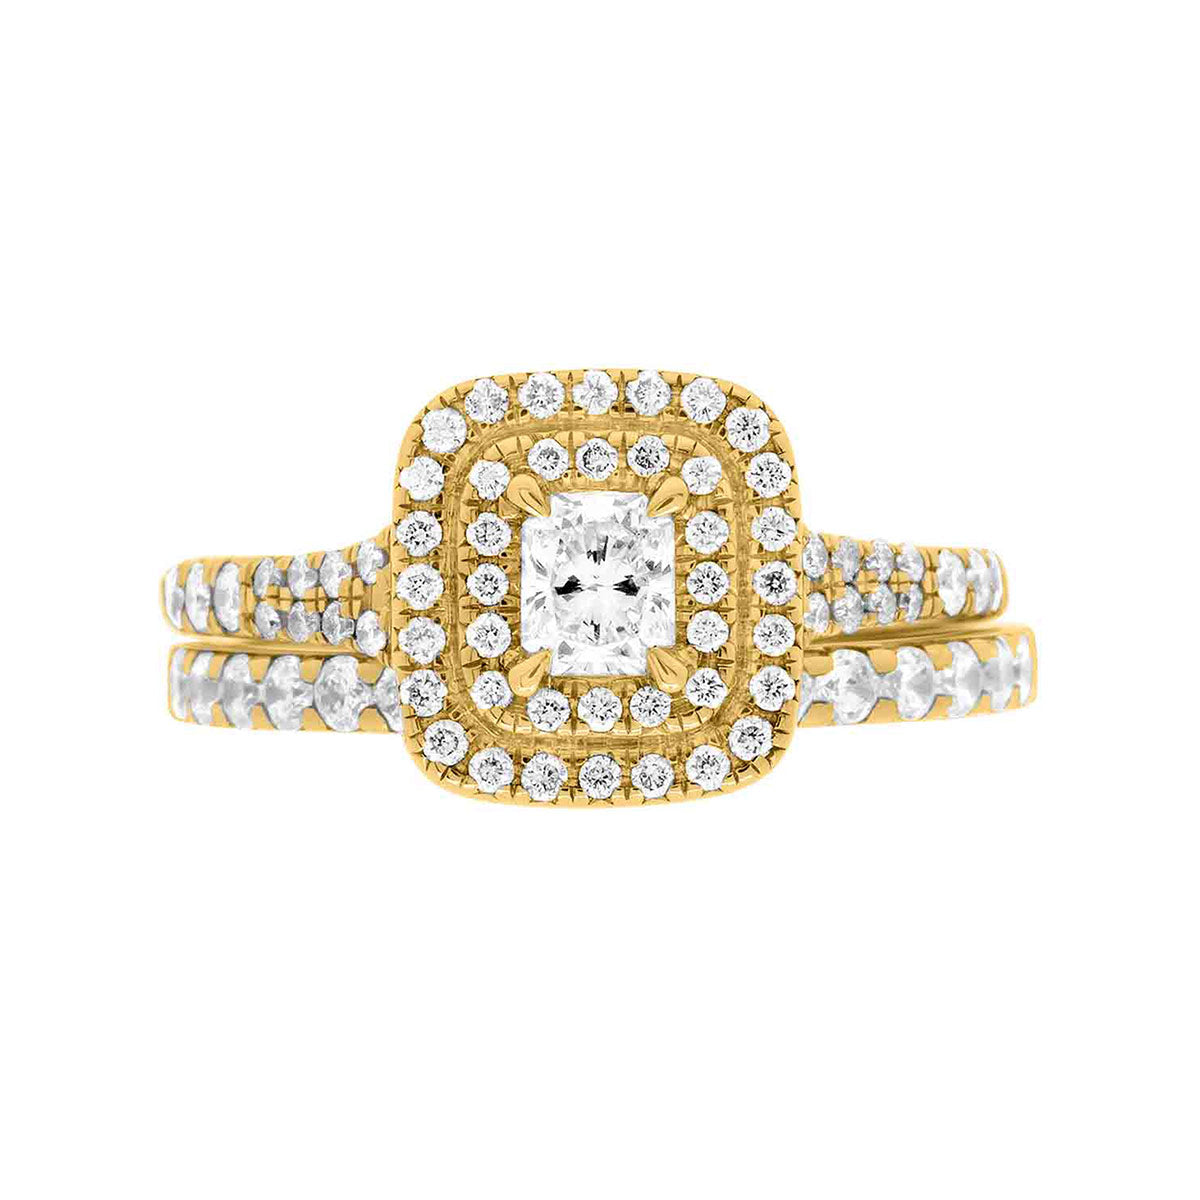 Double Halo Cushion Cut Diamond Ring in yellow gold with a matching diamond wedding ring